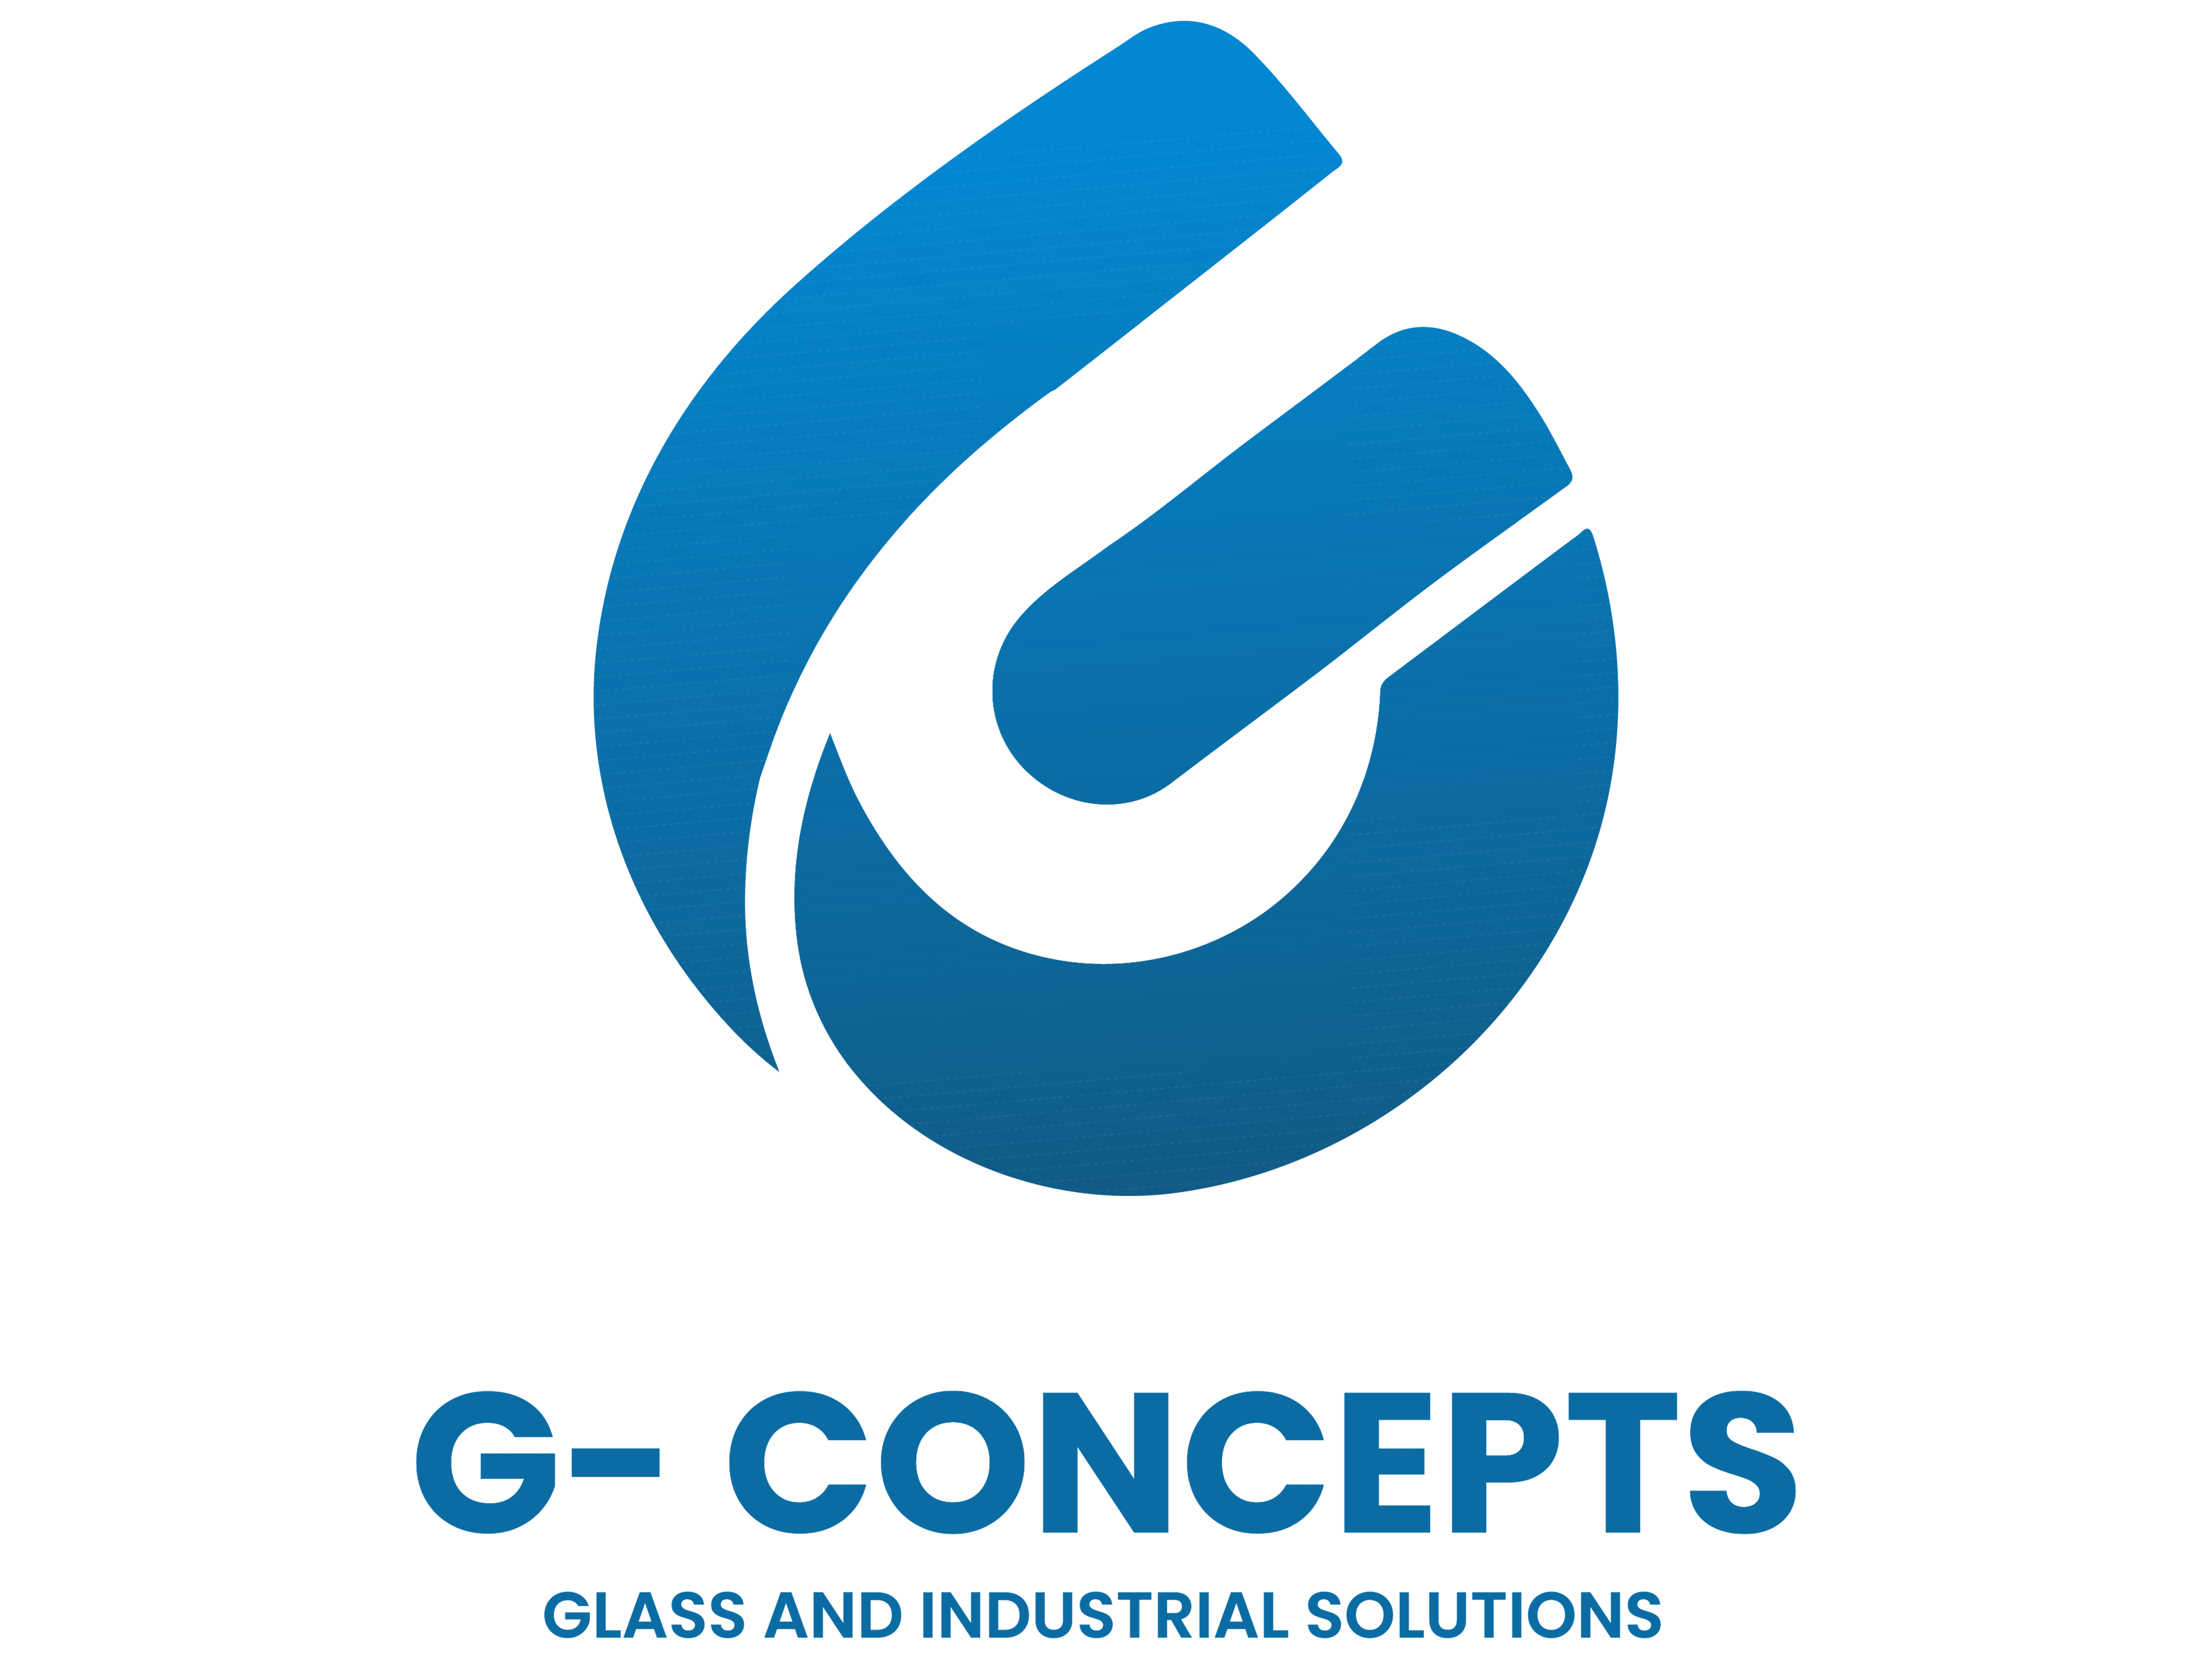 G Concepts|Accounting Services|Professional Services